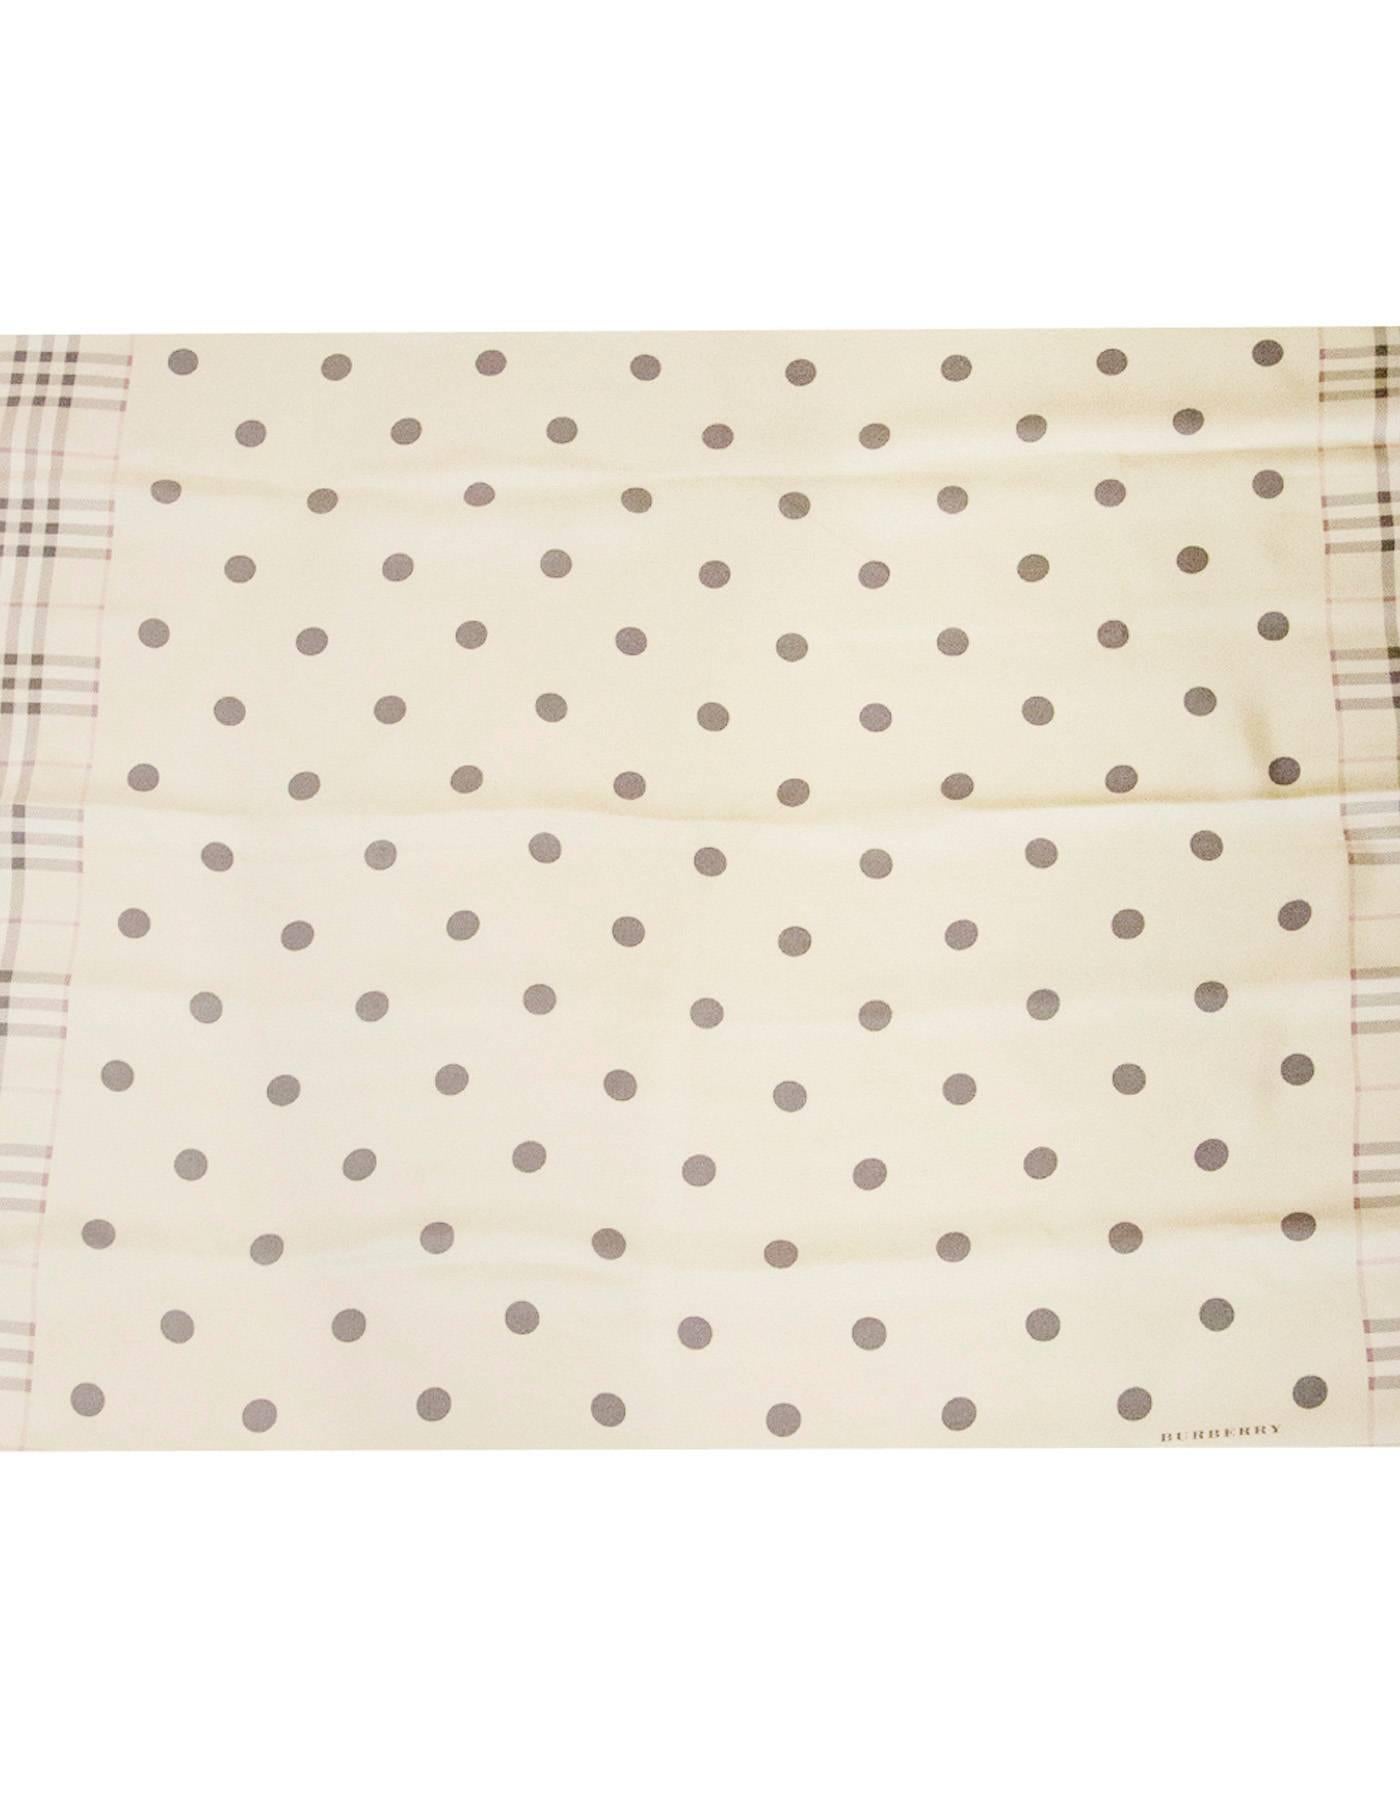 Burberry Pastel Polka Dot & Nova Plaid Silk Scarf

Made In: Italy
Color: Cream, pastel red and grey
Composition: 100% silk
Overall Condition: Excellent pre-owned condition with the exception of a few small pulls throughout as well as a few faint